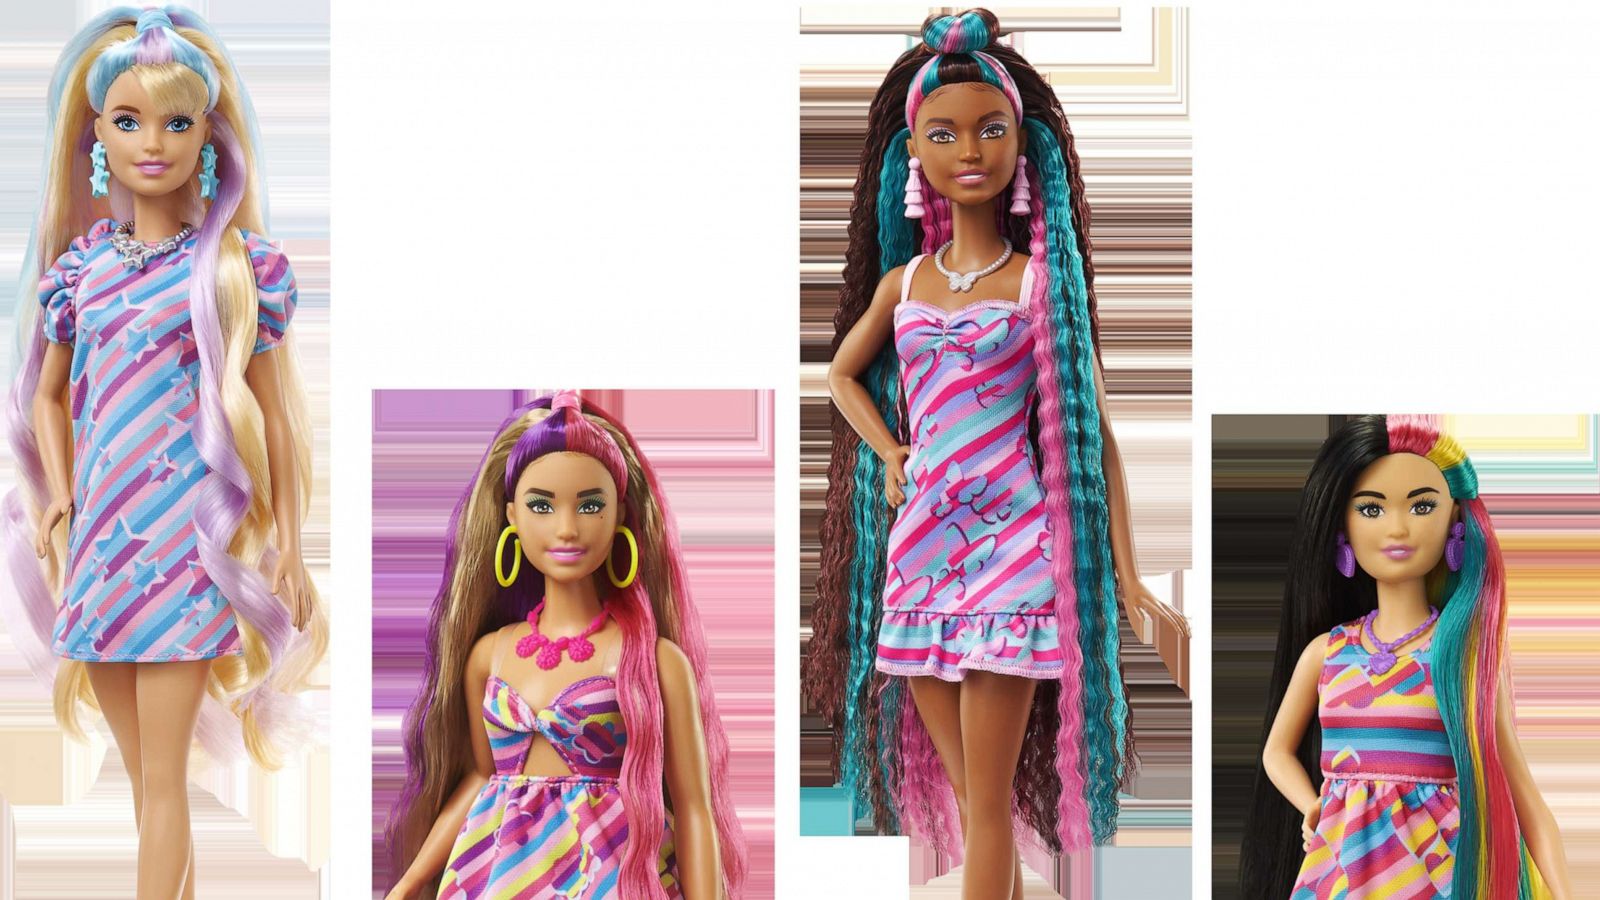 Meet the New Wave of More Diverse Barbie Dolls  Smart News Smithsonian  Magazine